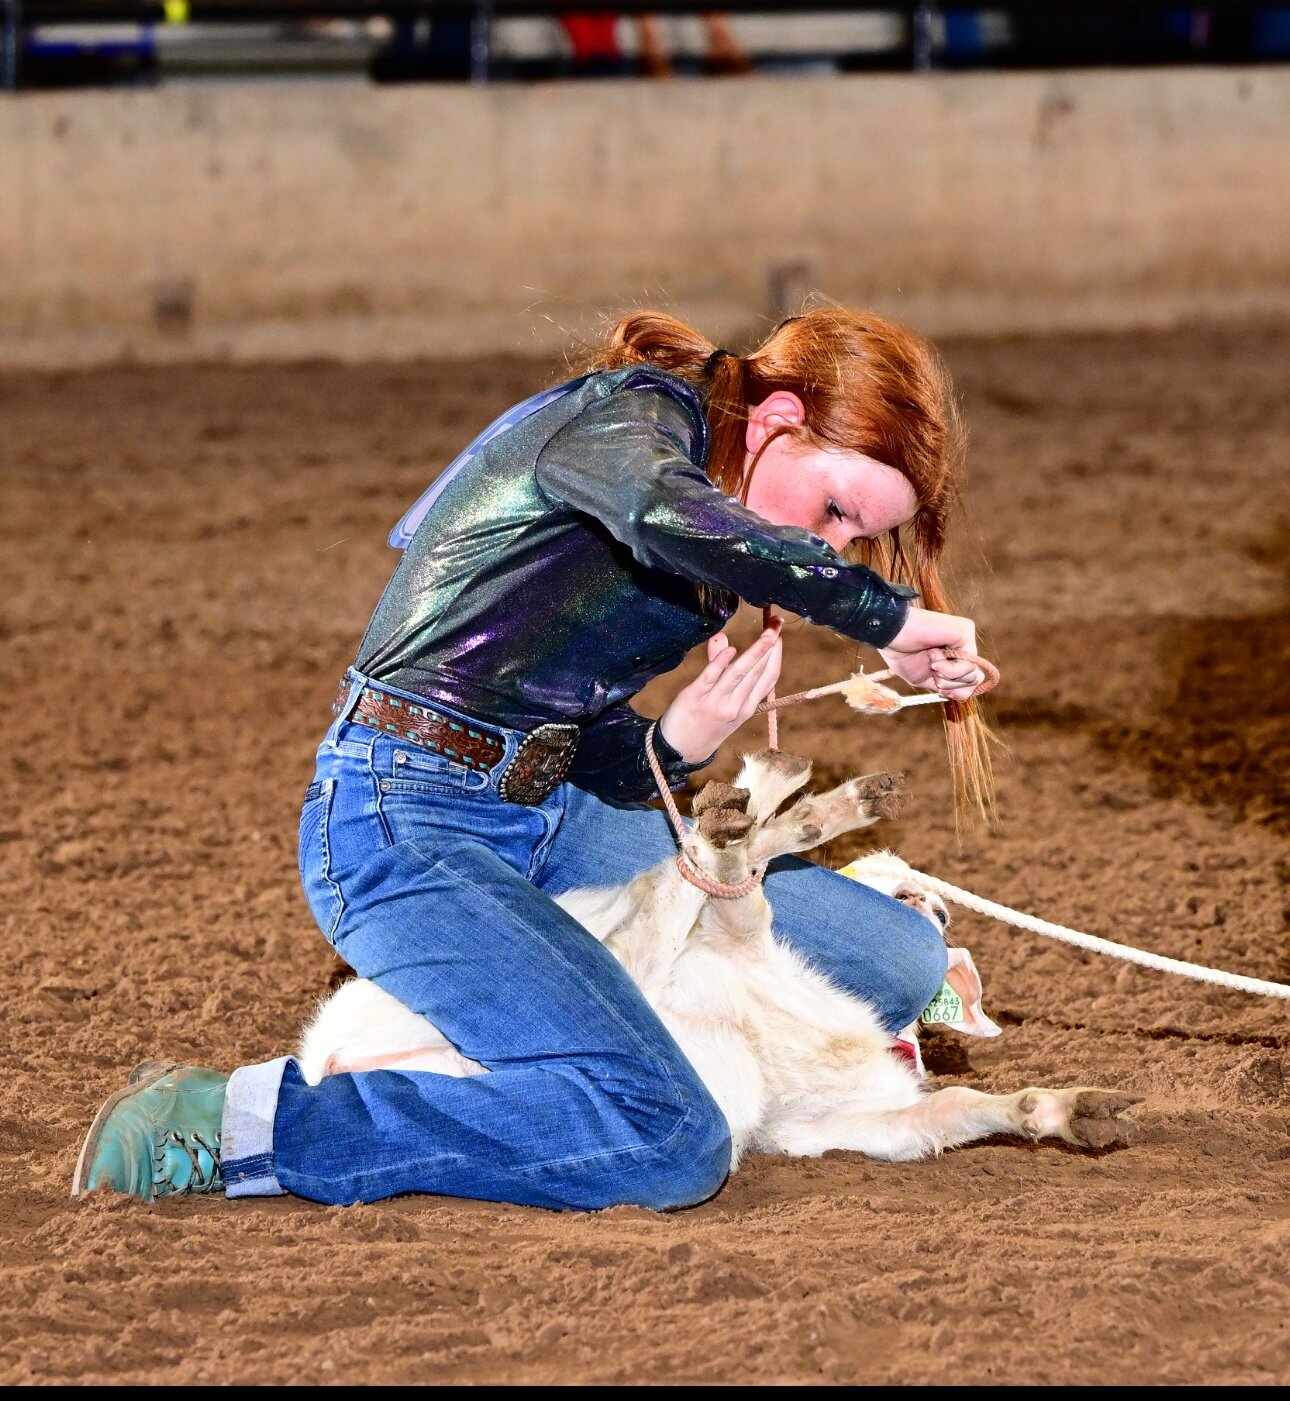 Emme Albert, 12, ties up a goat for the goat tying competition.